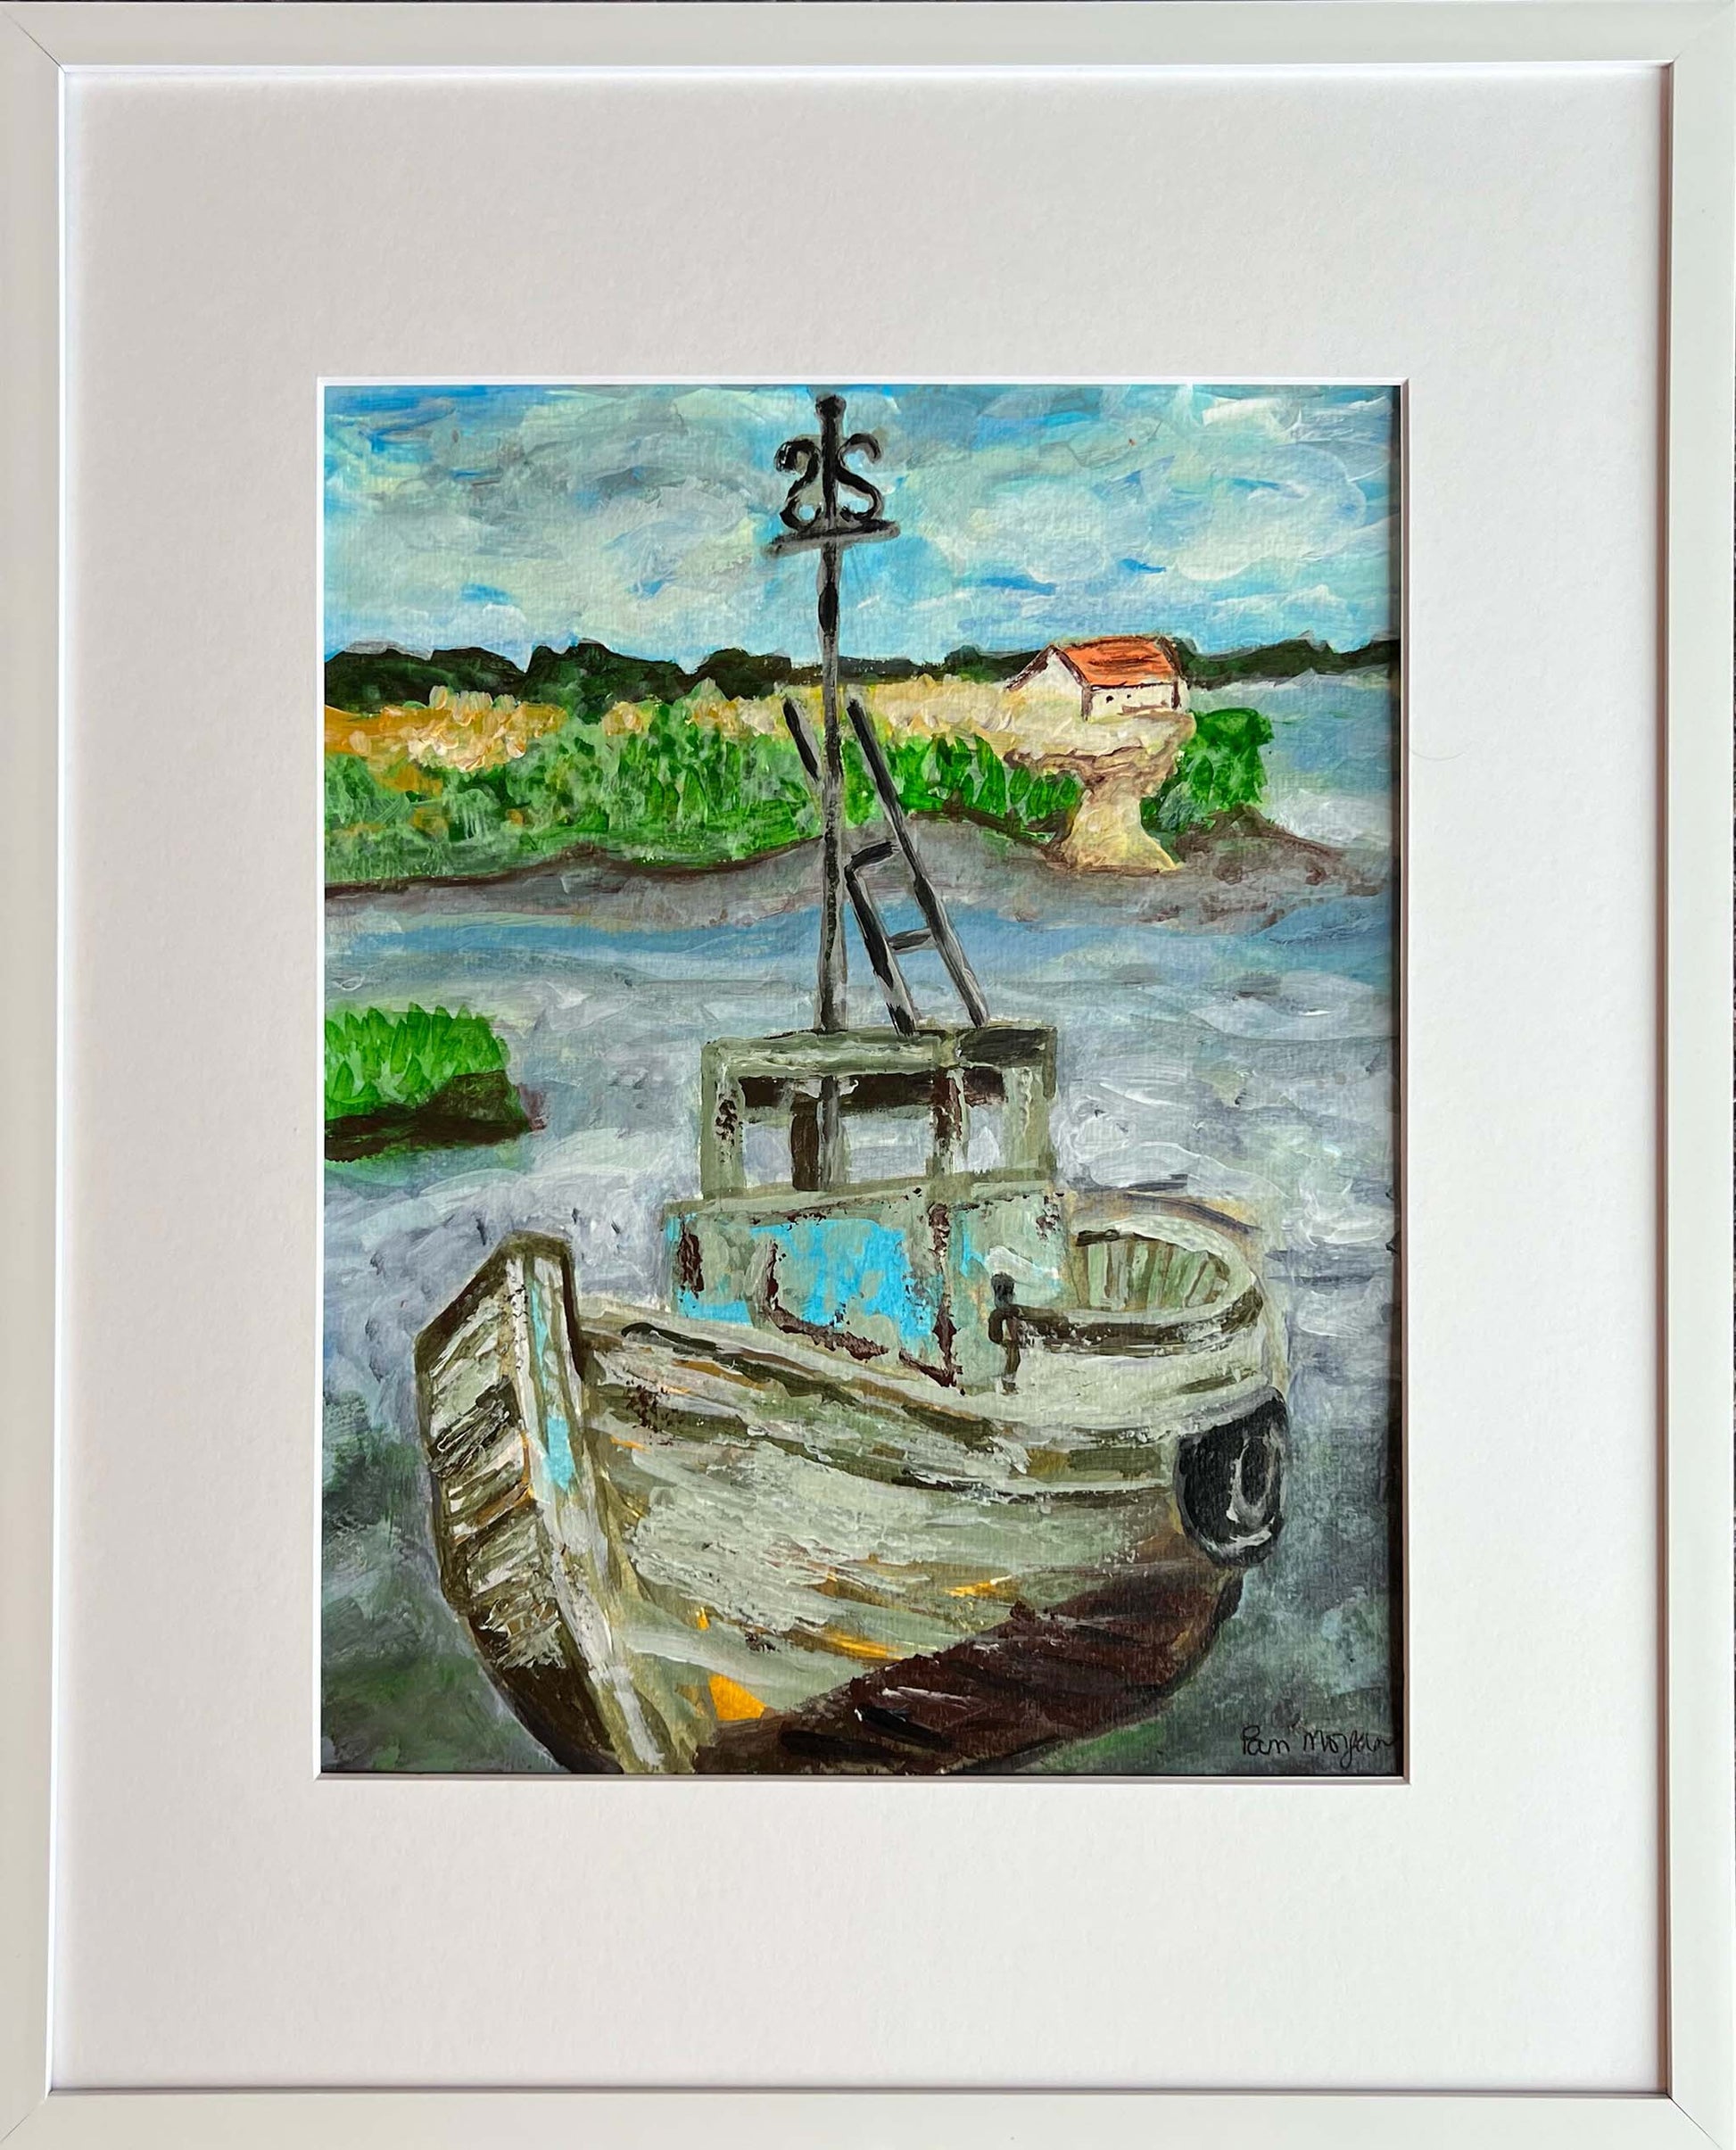 acrylic landscape painting of a small boat in a grassy bay